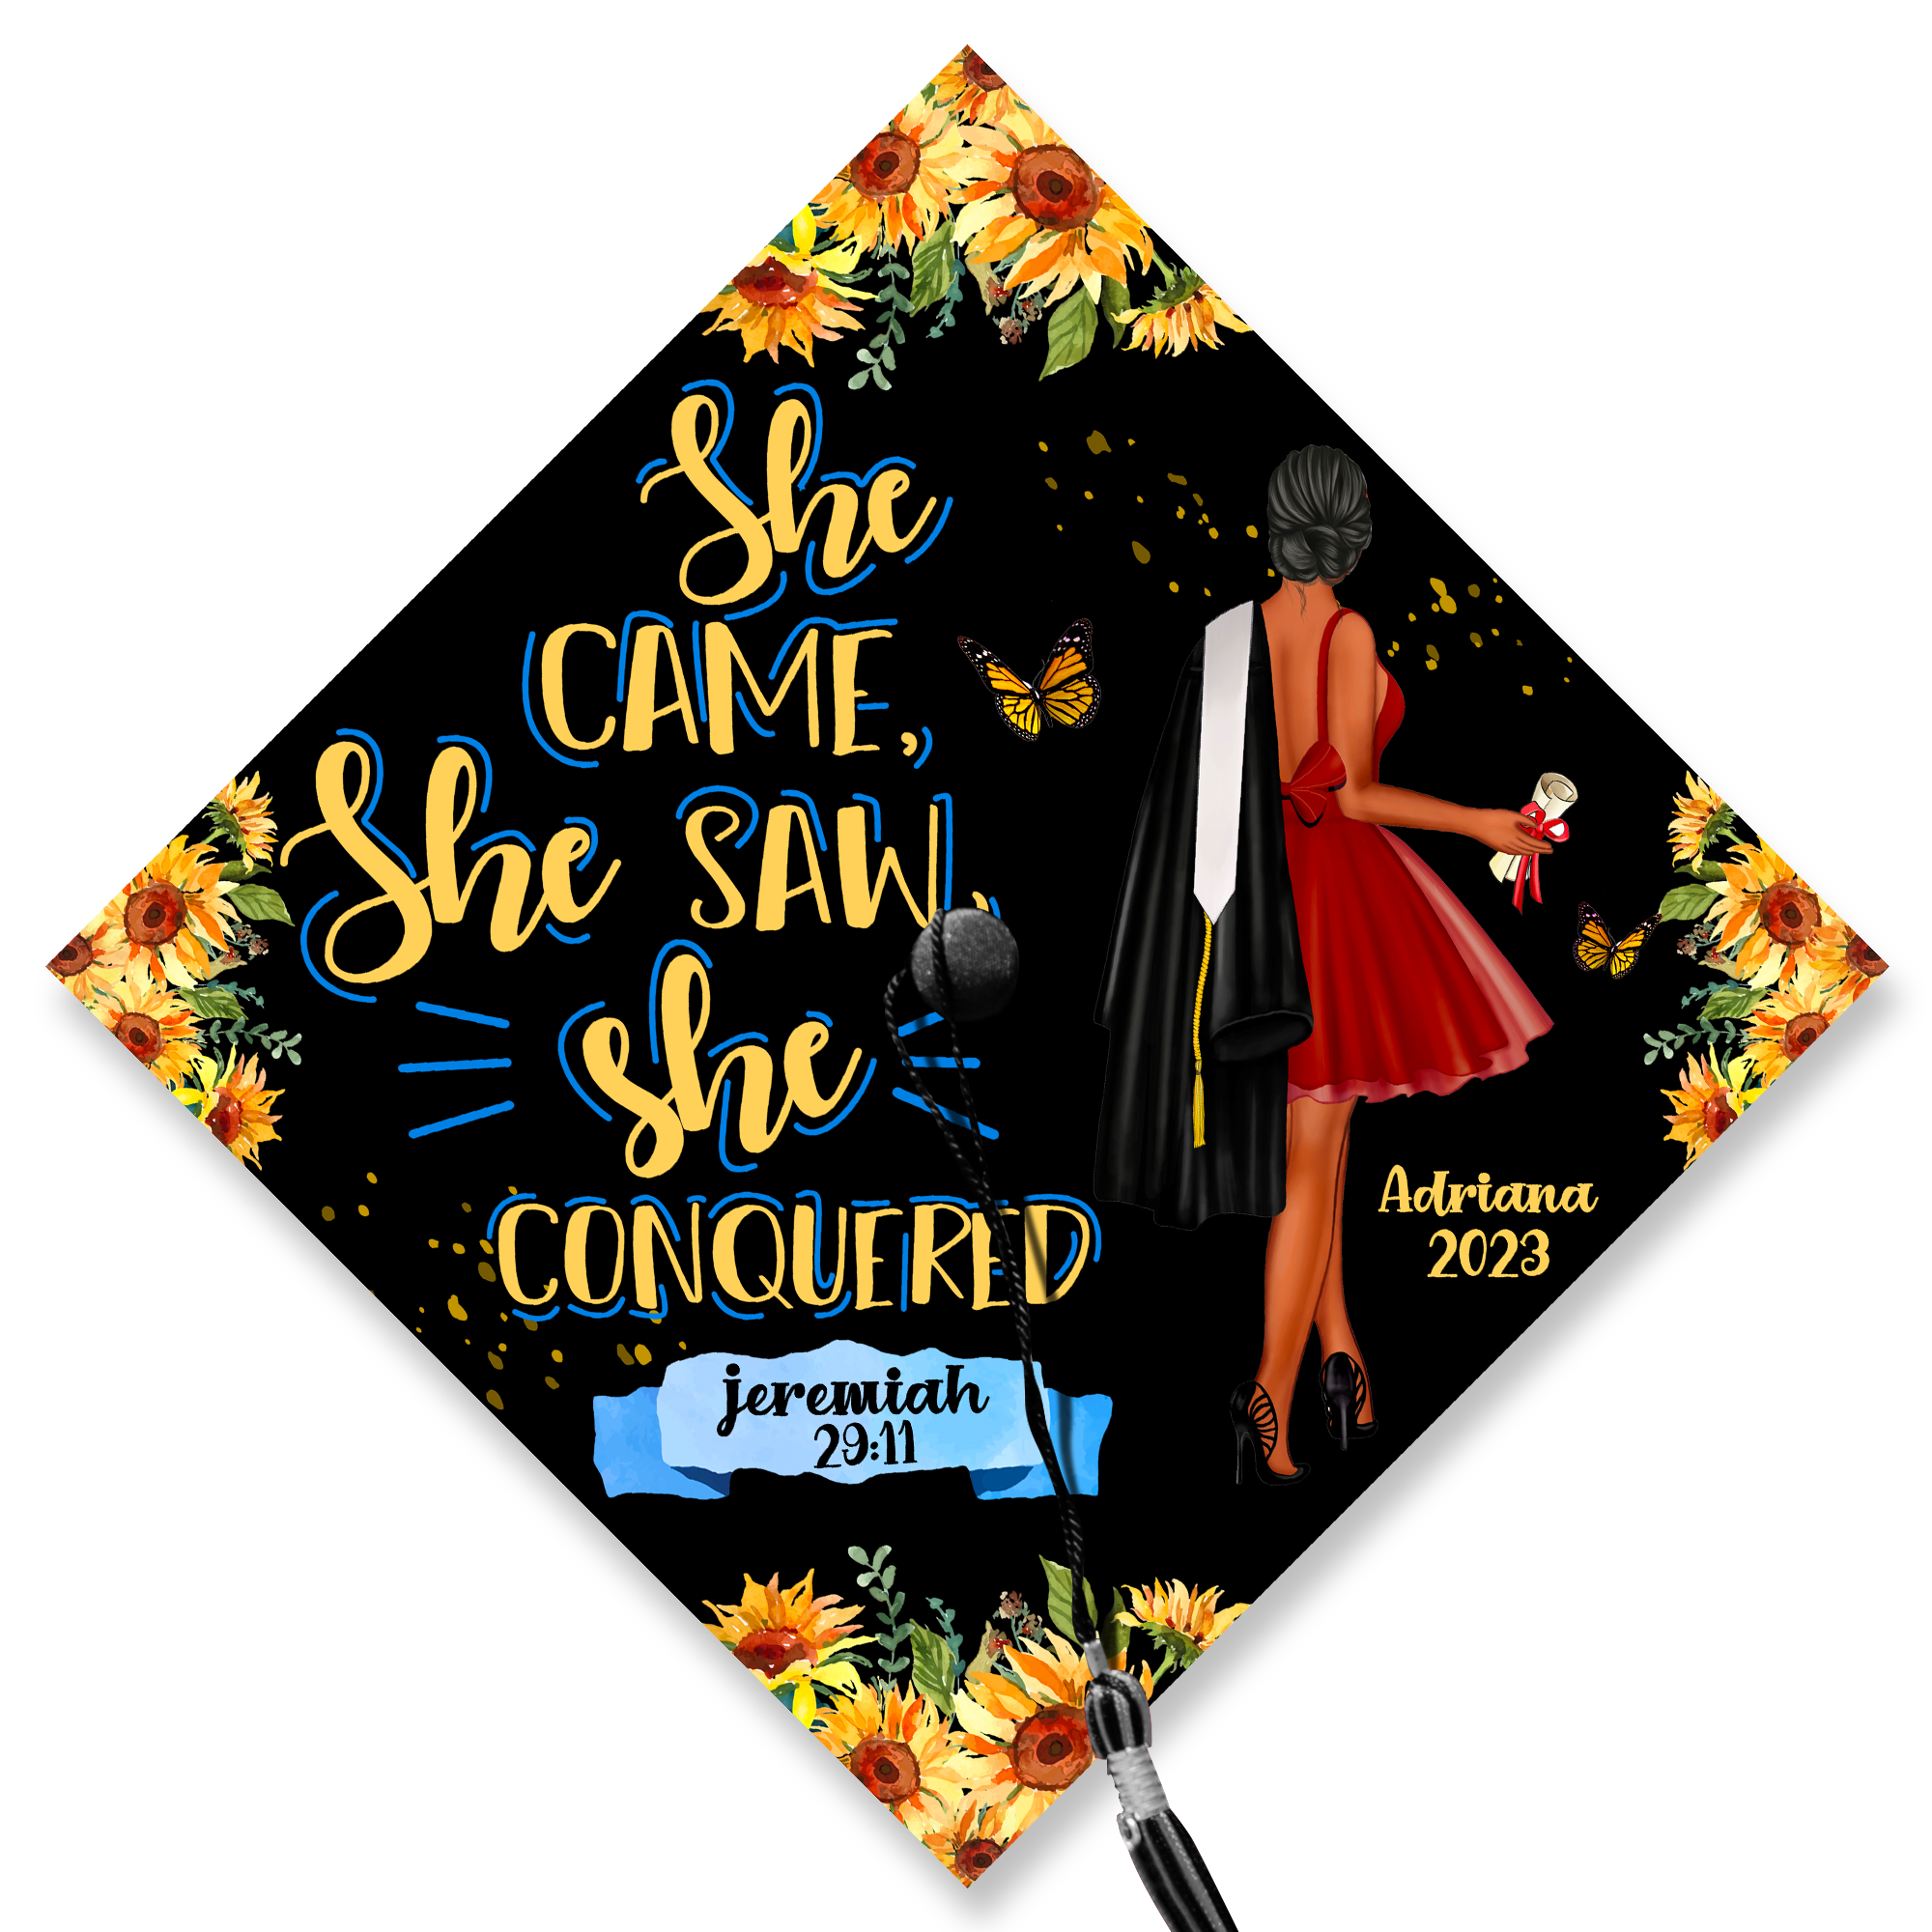 She Came, She Saw, She Conquered Graduation Cap Topper